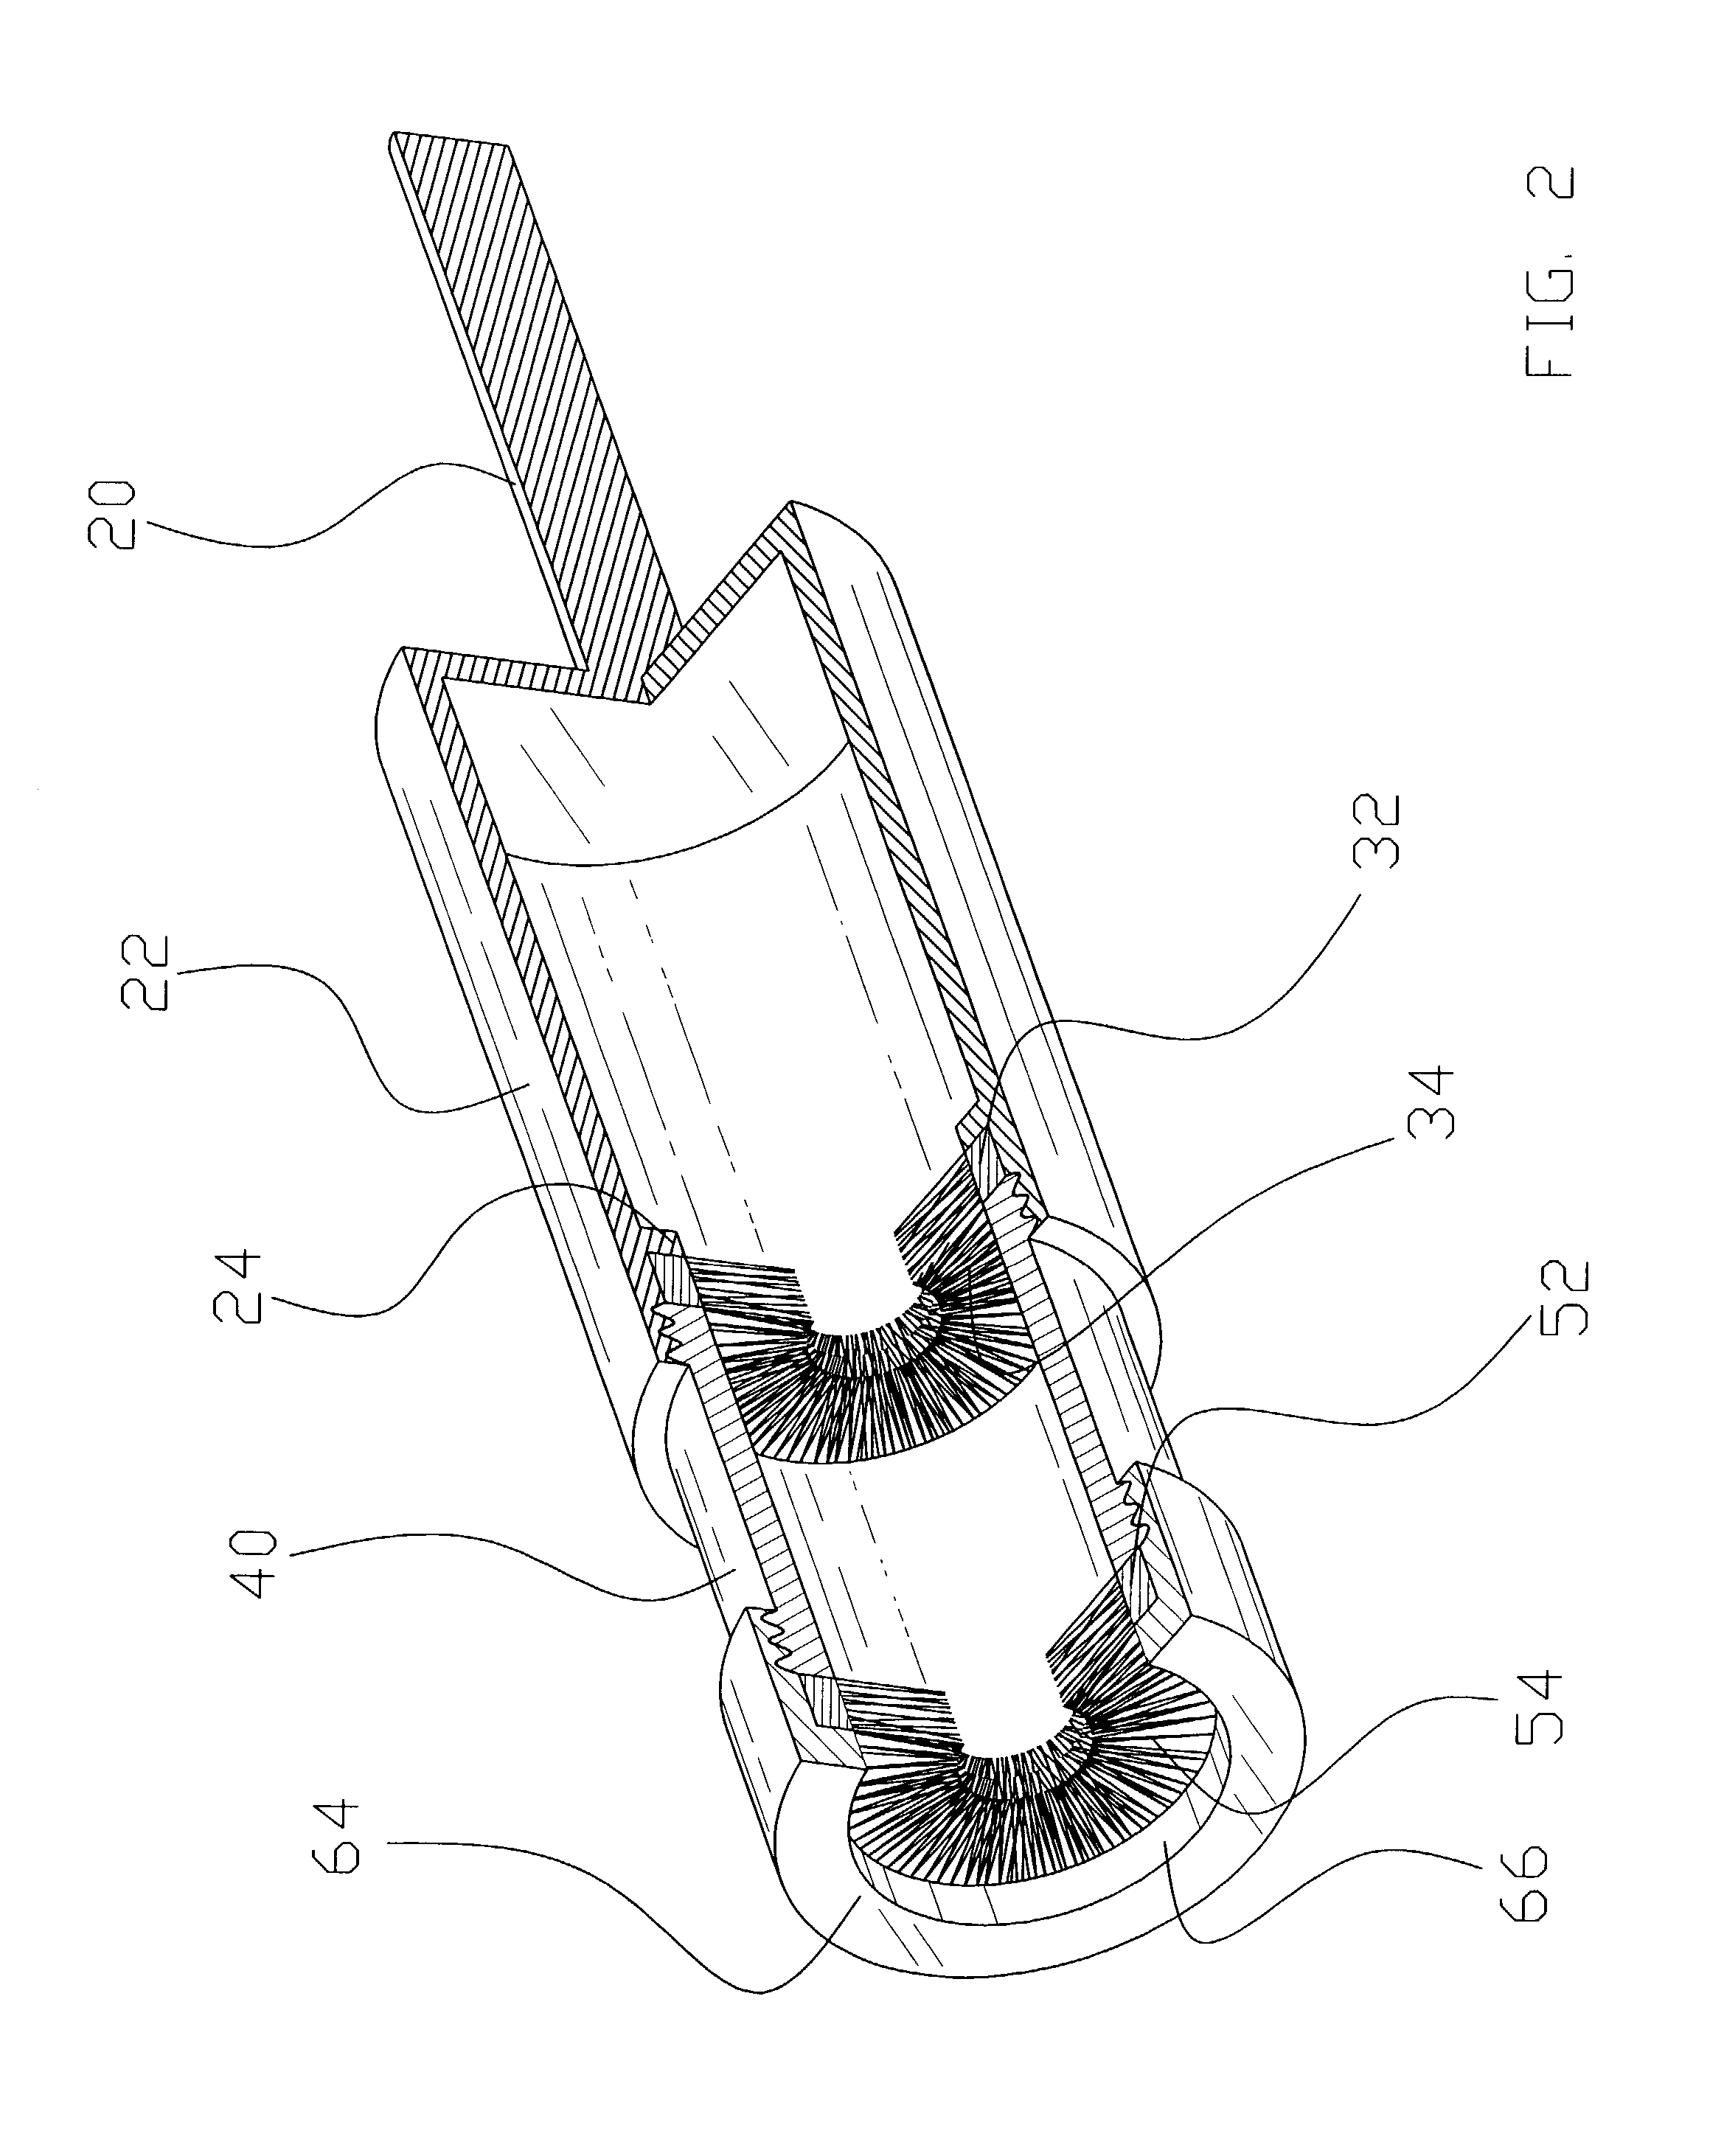 Bolt cleaning system